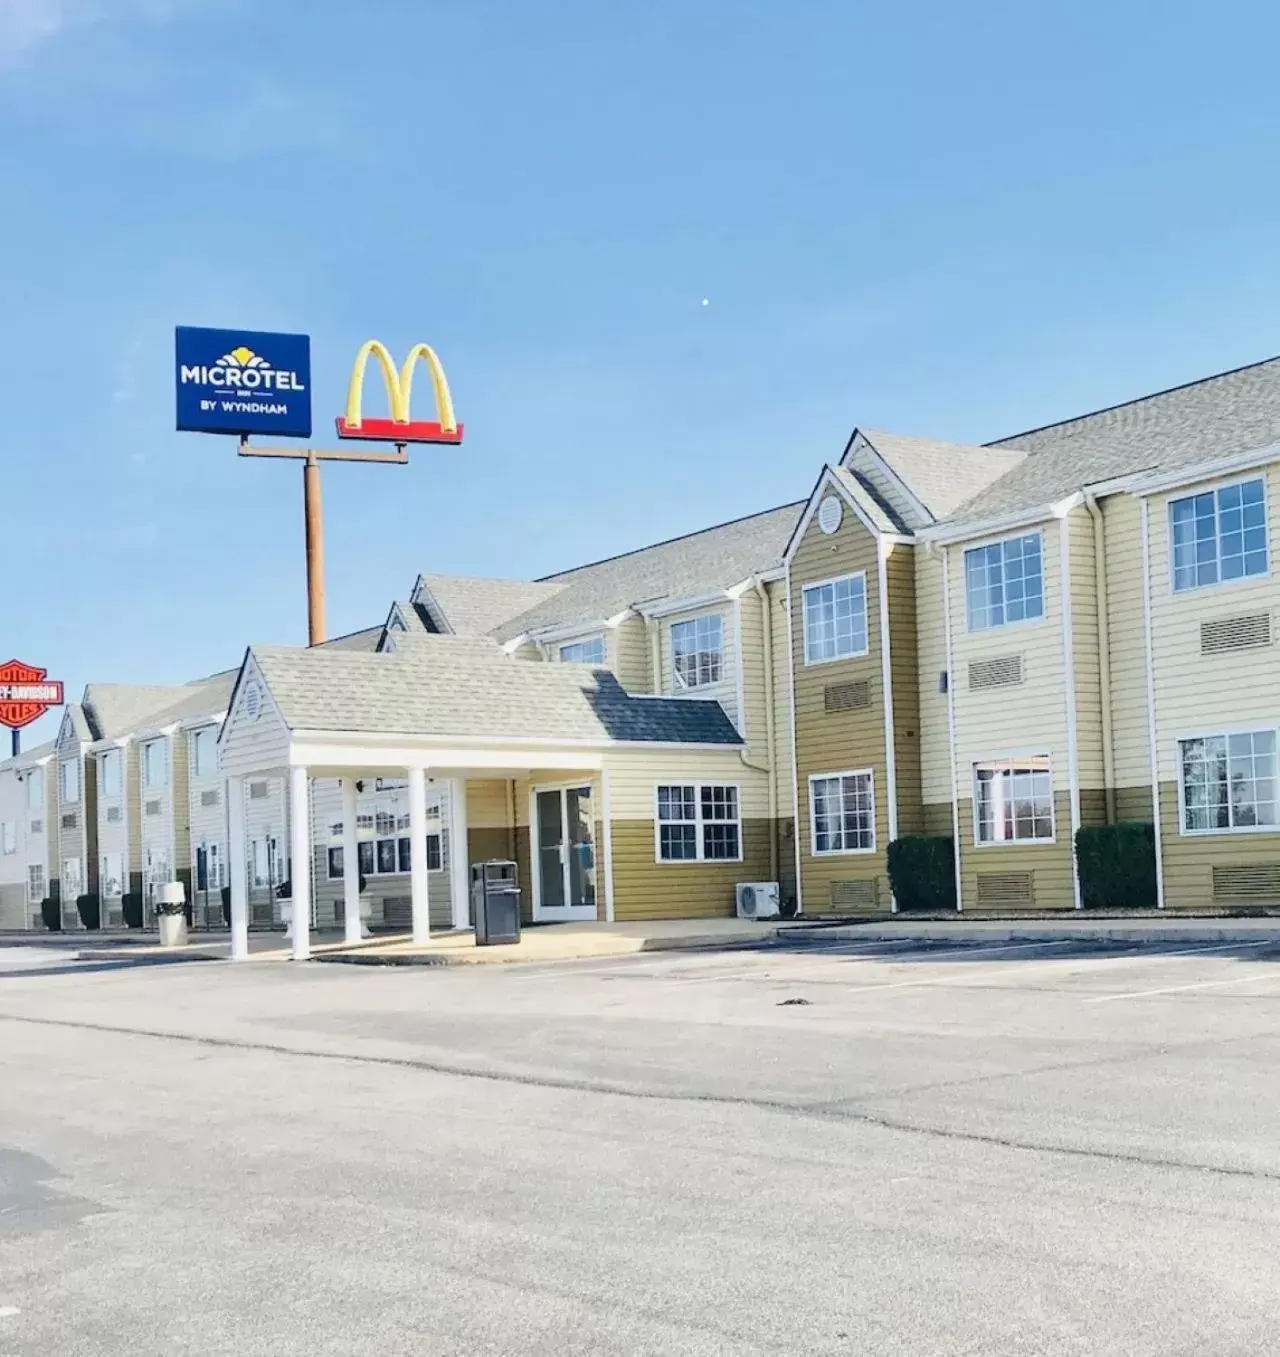 Property building in Microtel Inn & Suites Cottondale